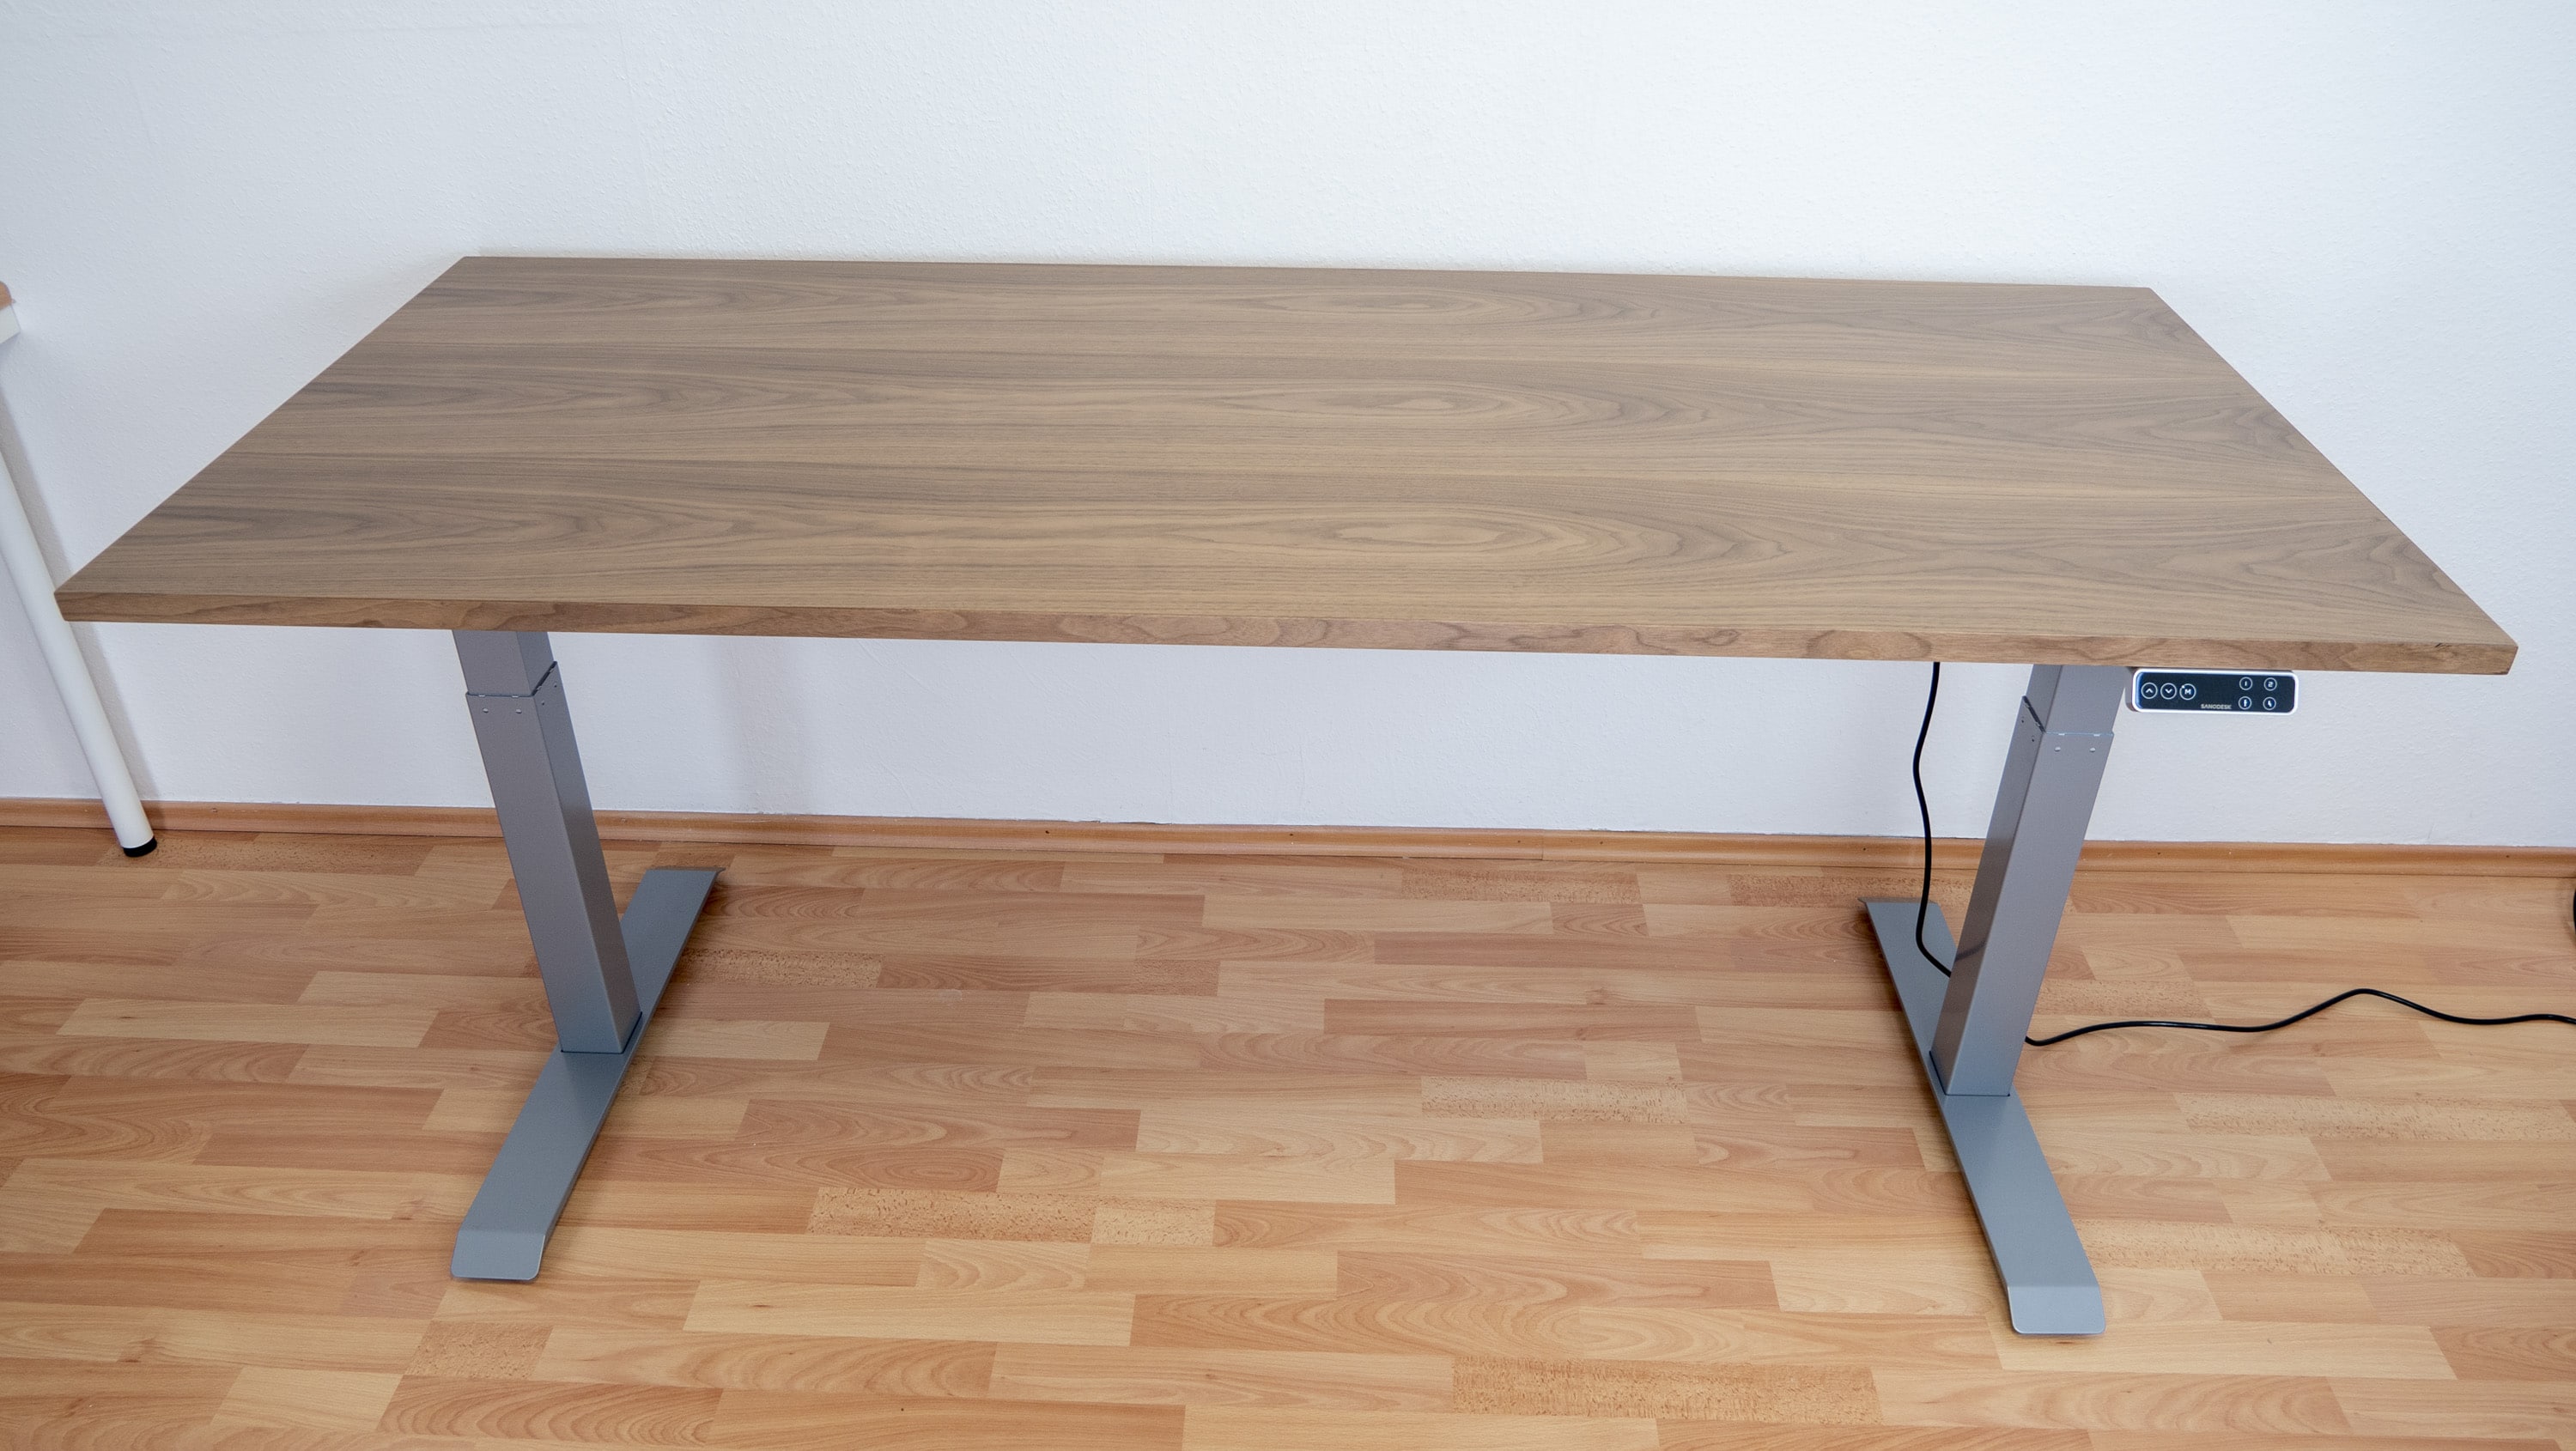 Flexispot E7 in test - how does the electrically height-adjustable desk  perform?